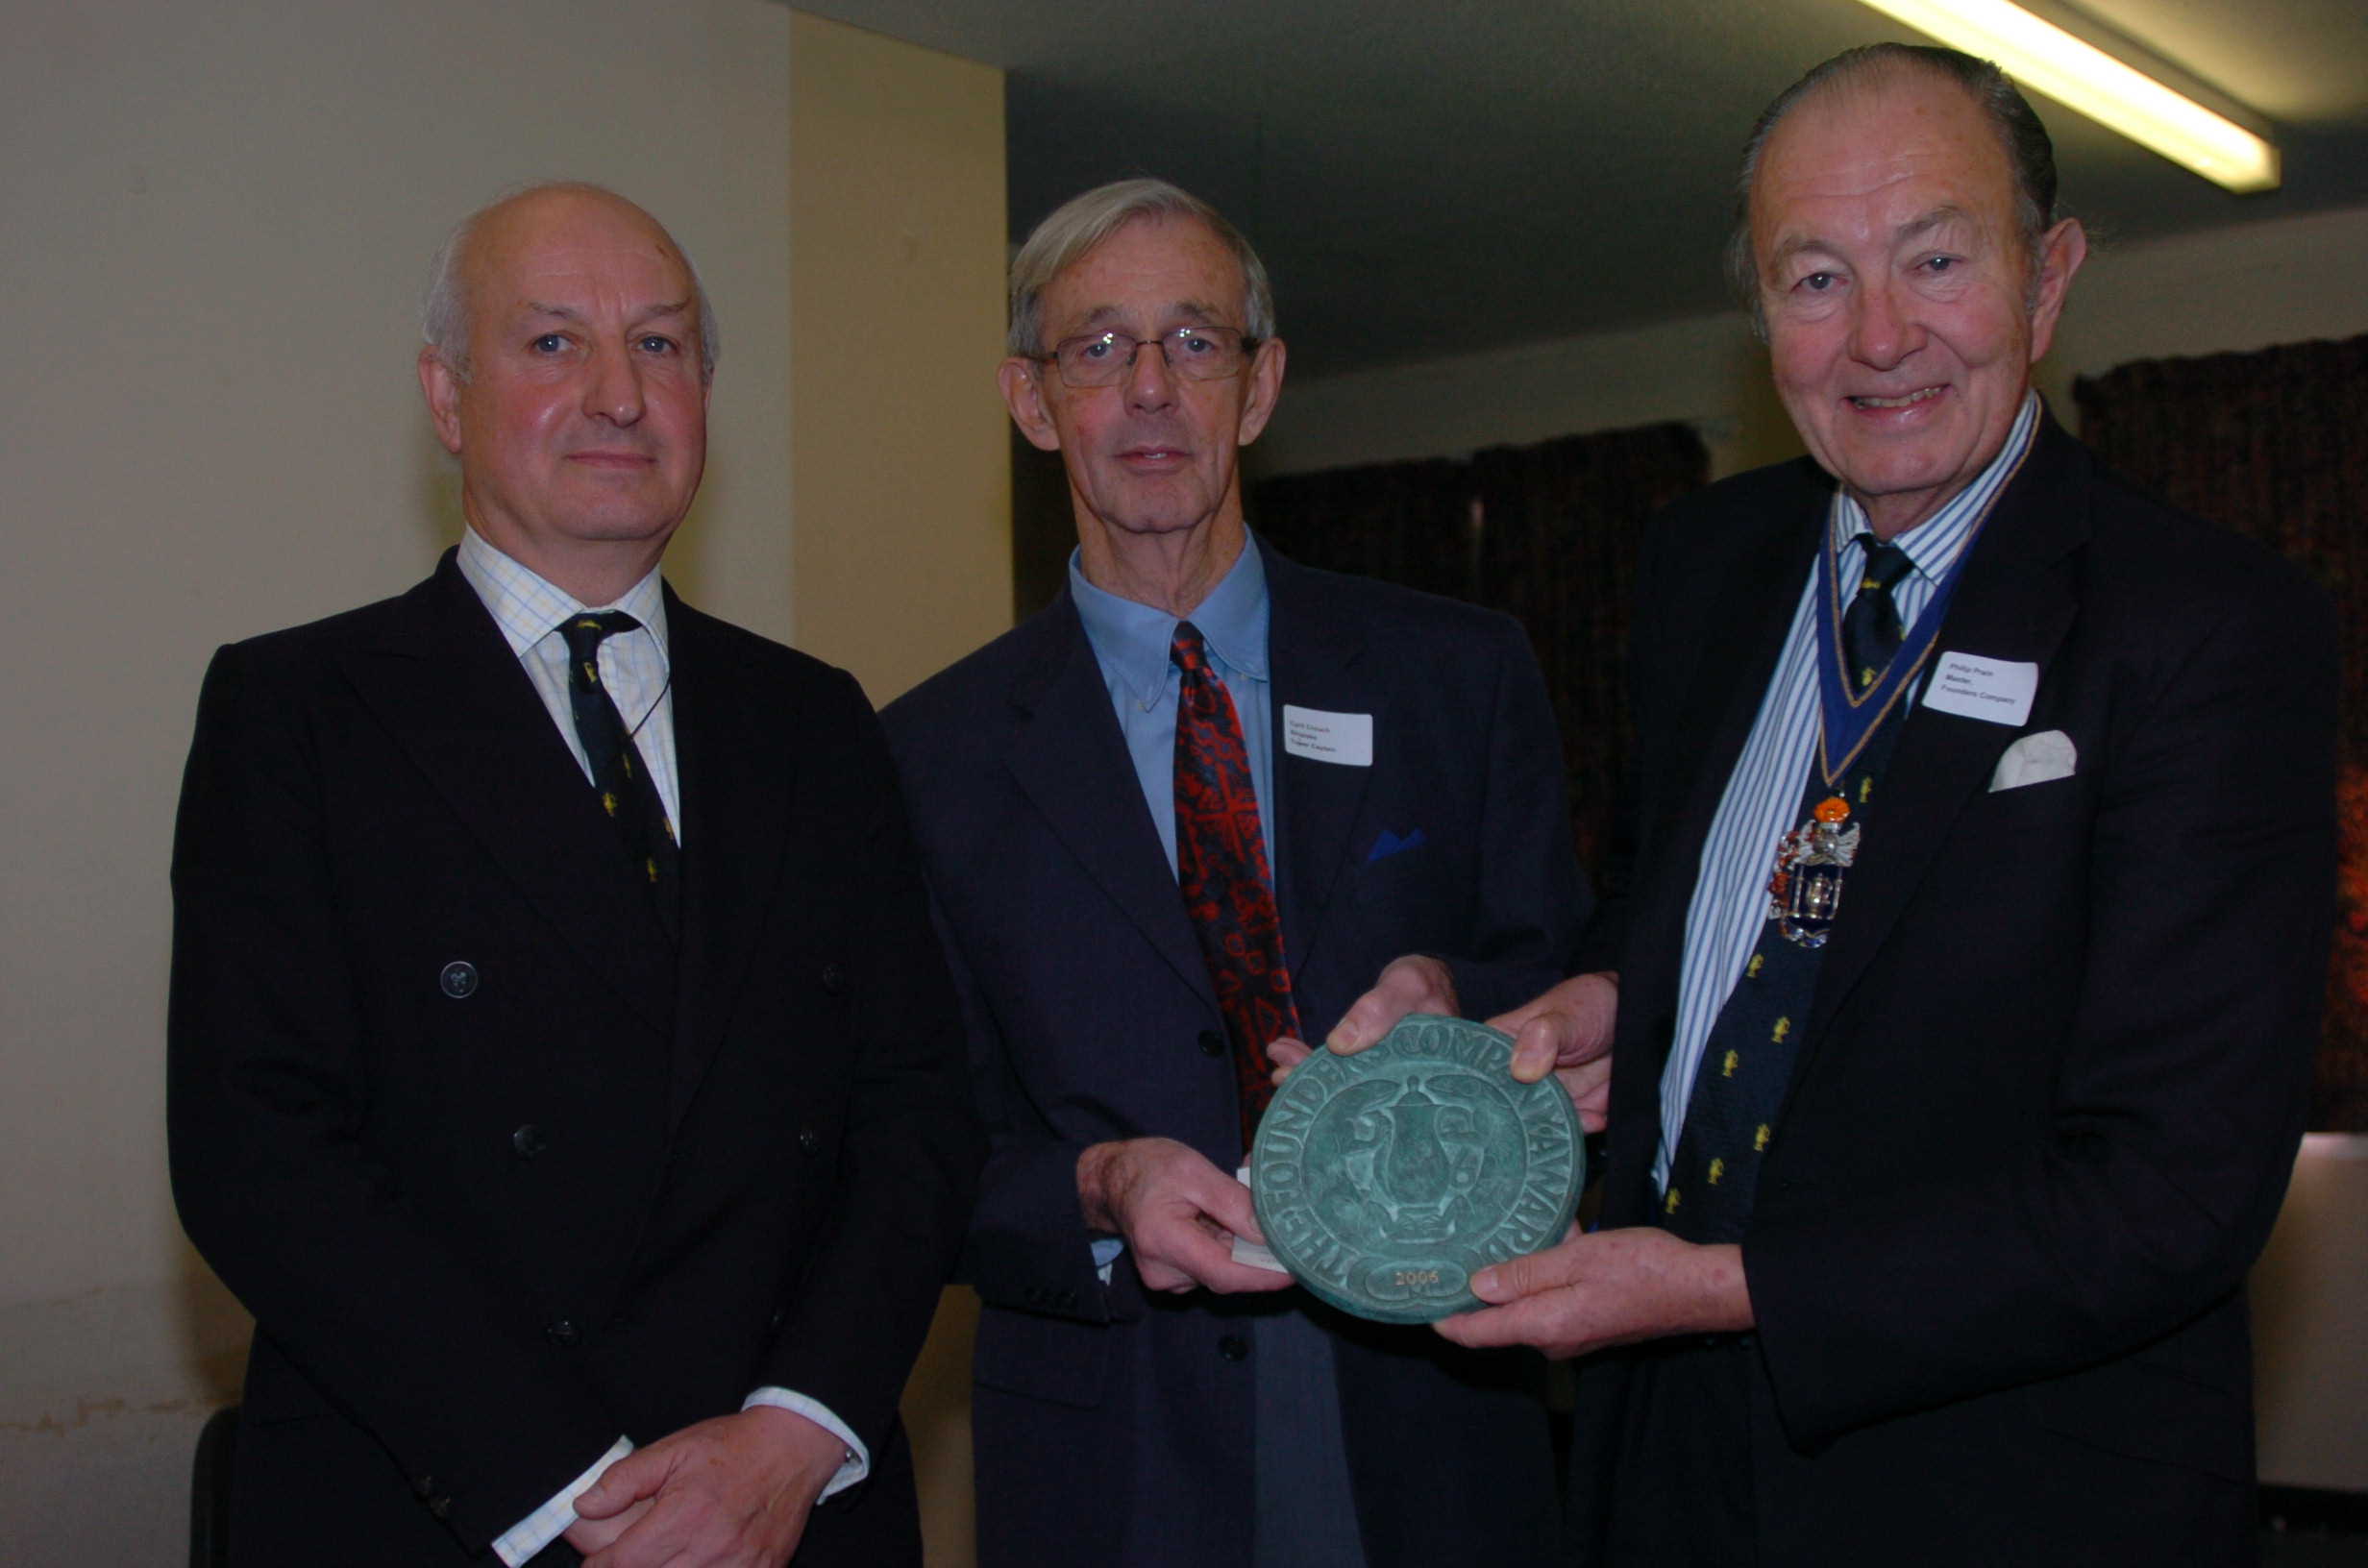 The Presentation of the plaque to Cyril Crouch